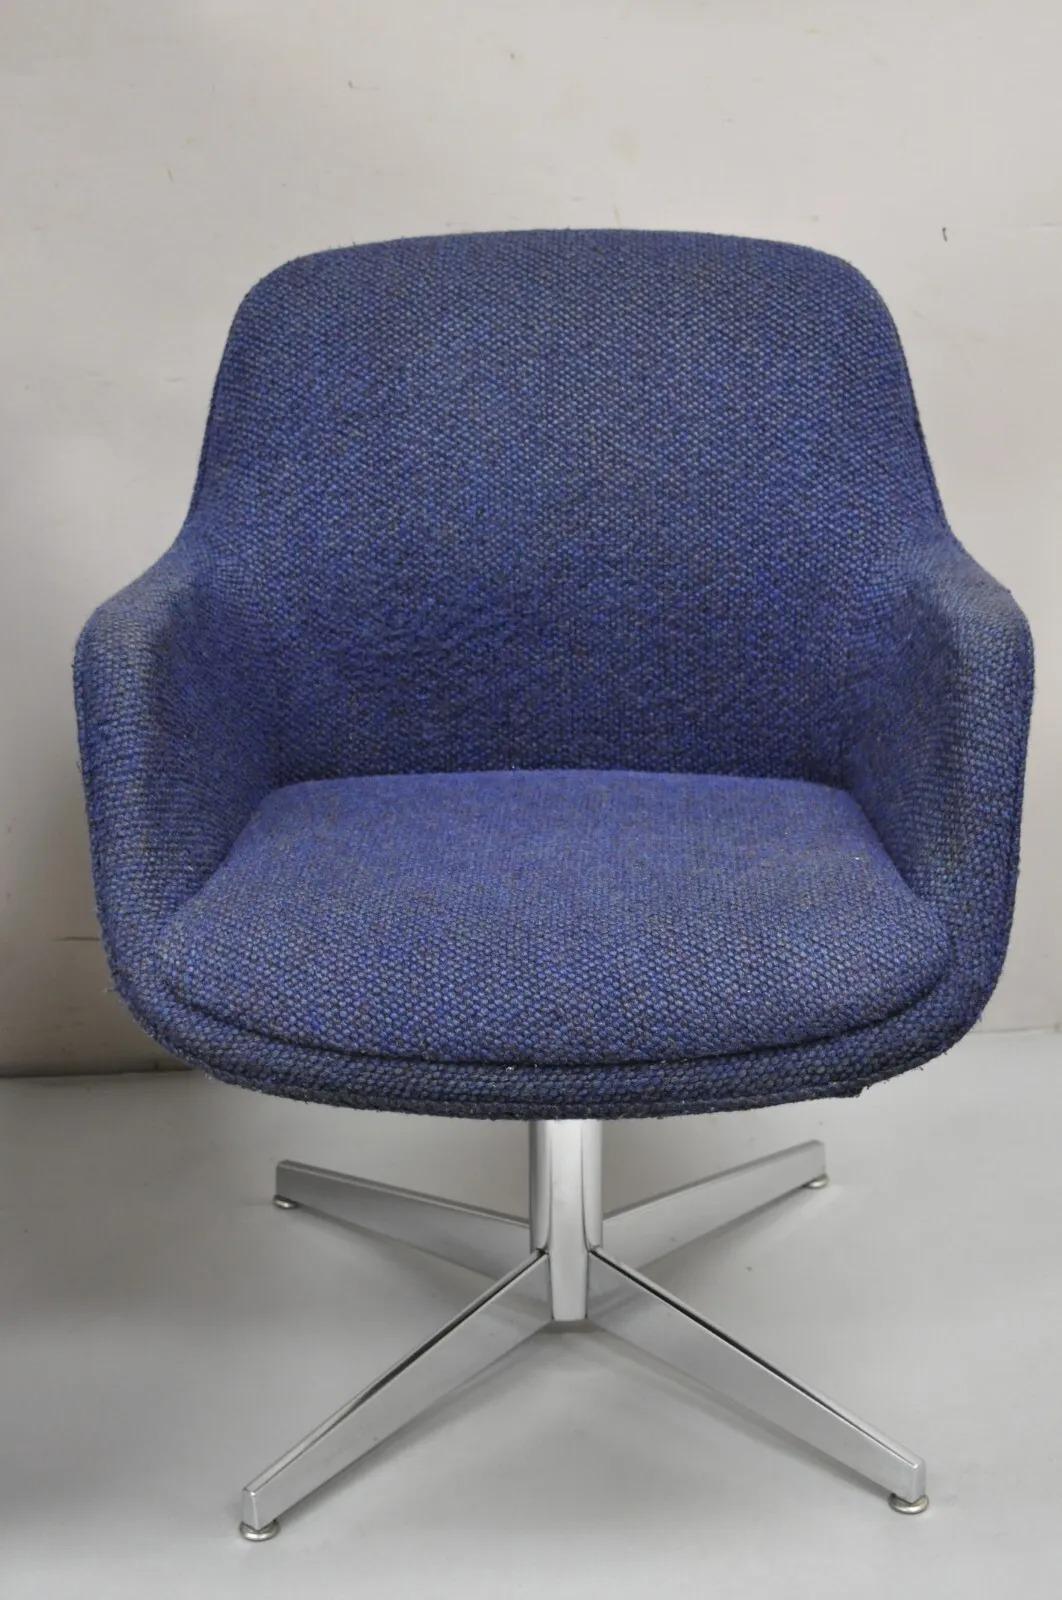 Metal Vintage Mid Century Modern Blue Upholstered Chrome Swivel Base Club Chair - Pair For Sale